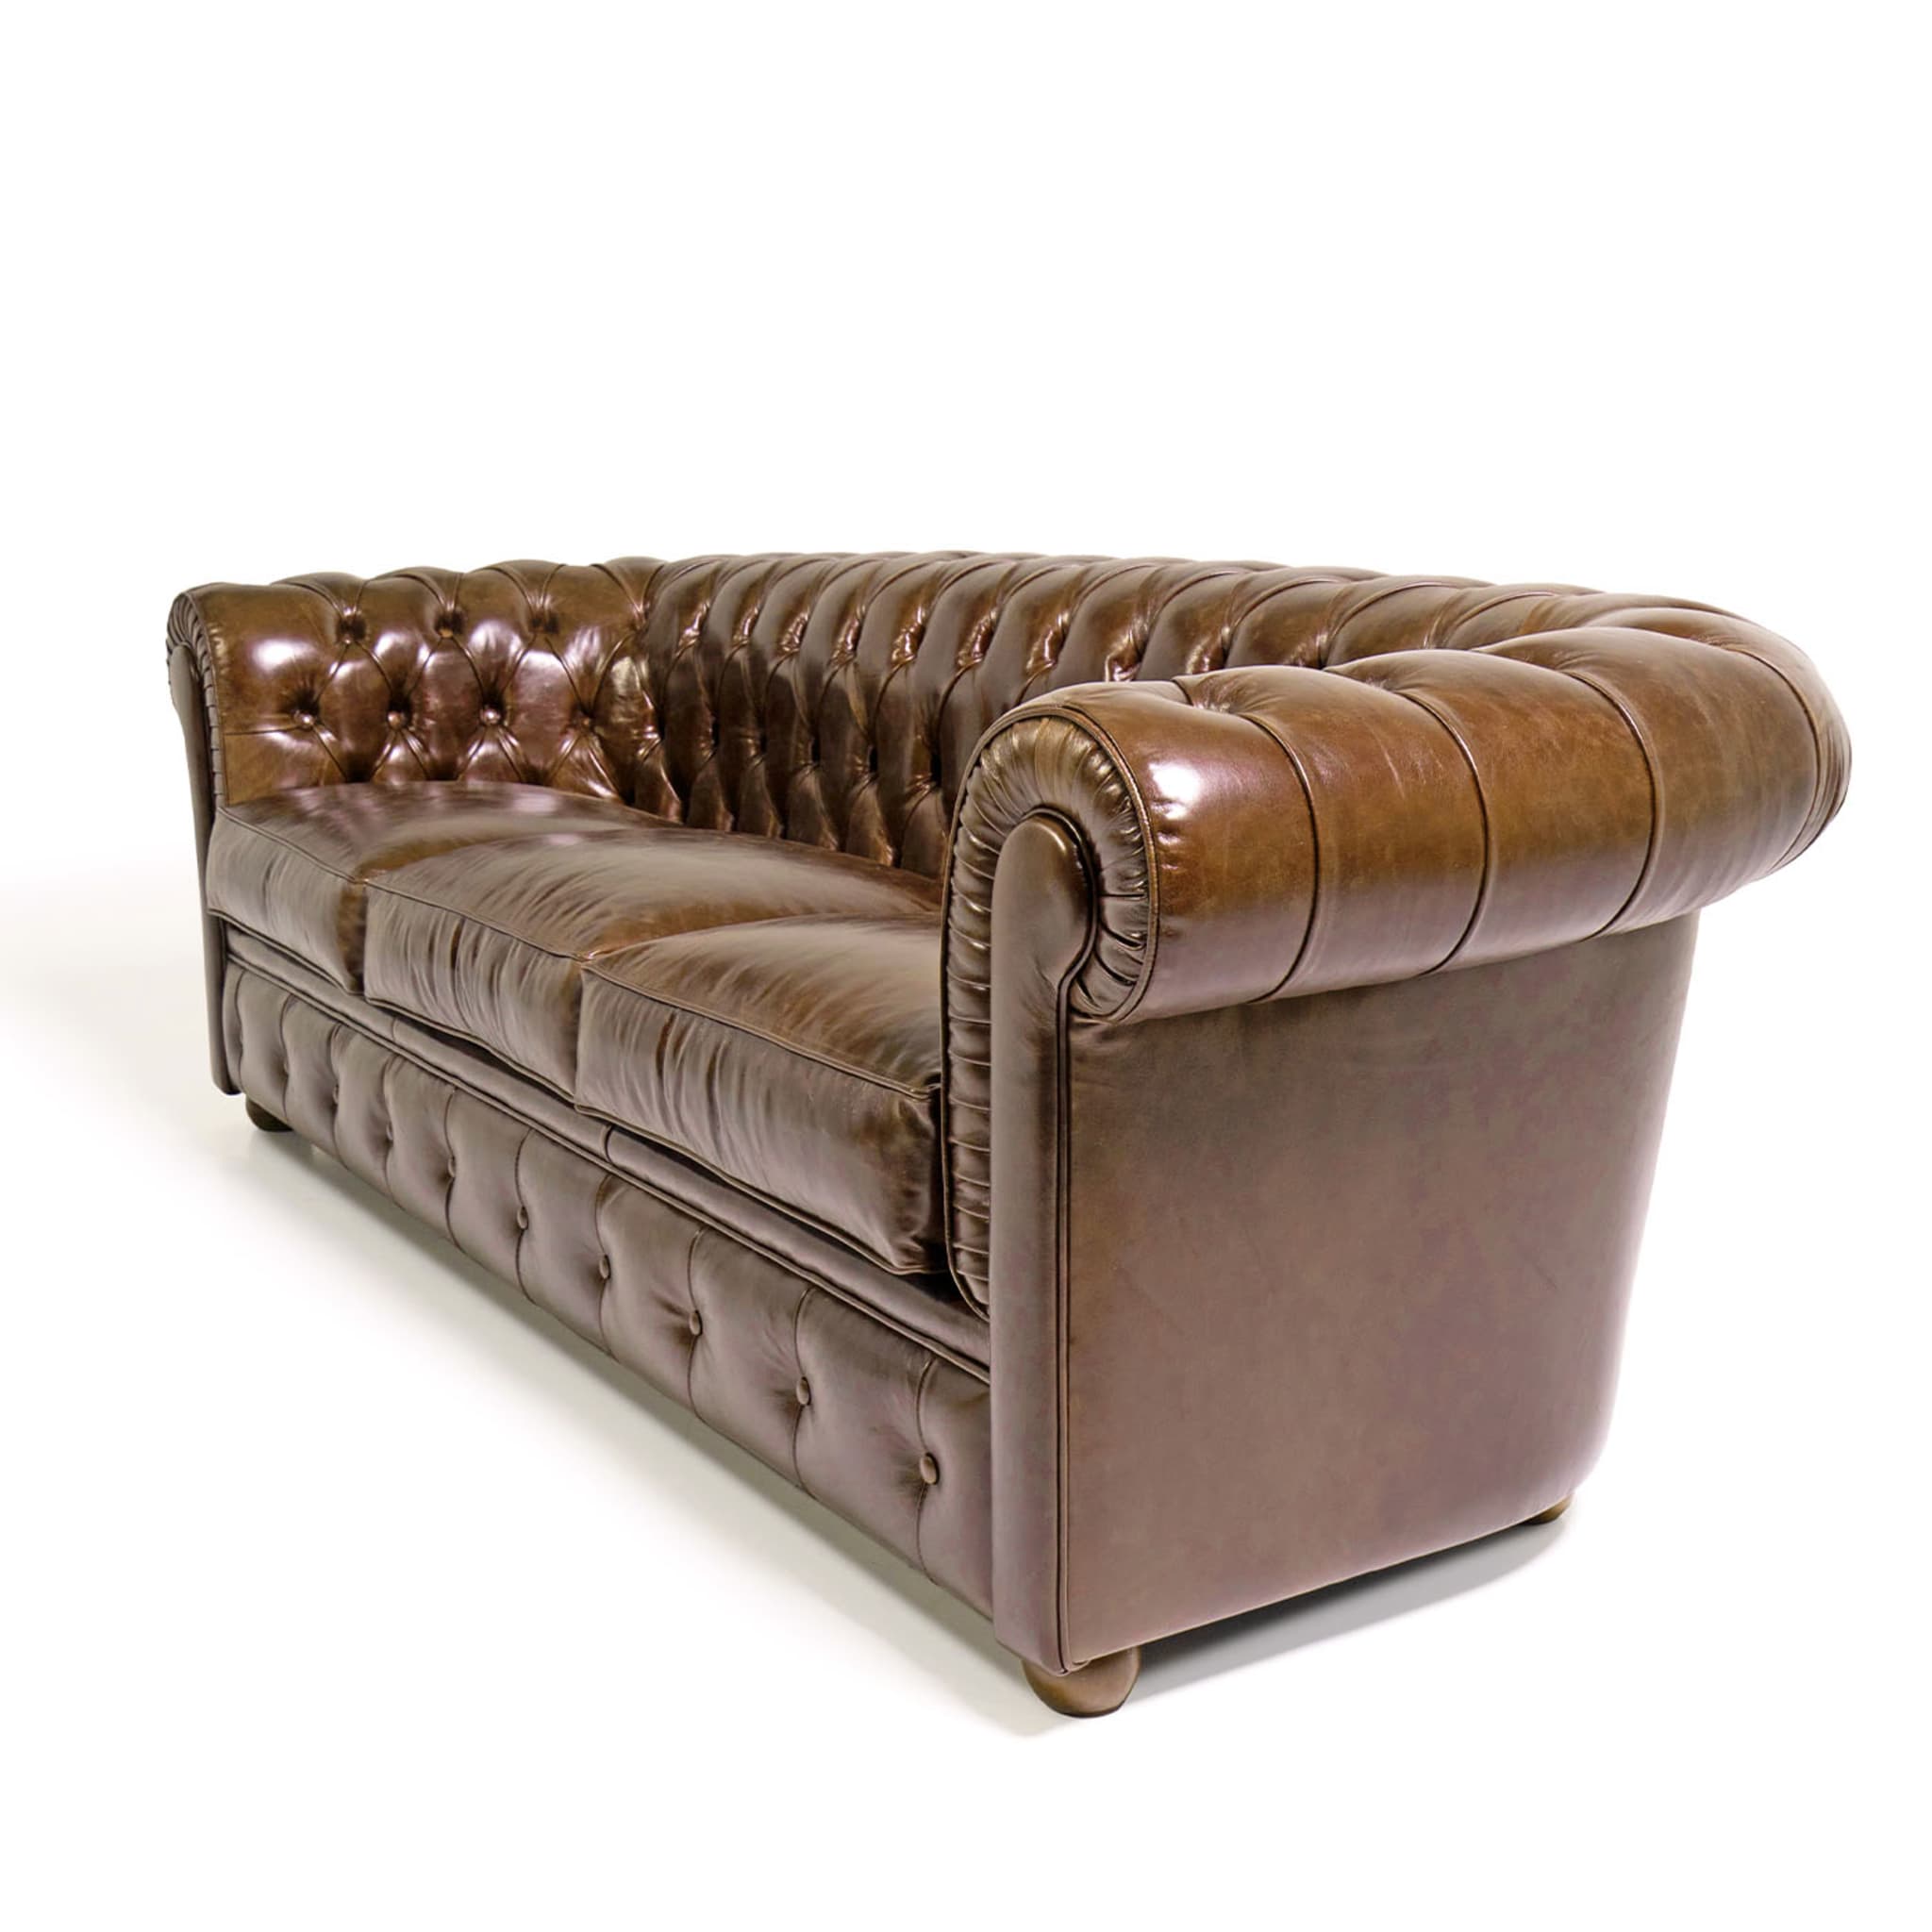 Chesterfield Brown Leather 3-seater Sofa Tribeca Collection - Alternative view 2